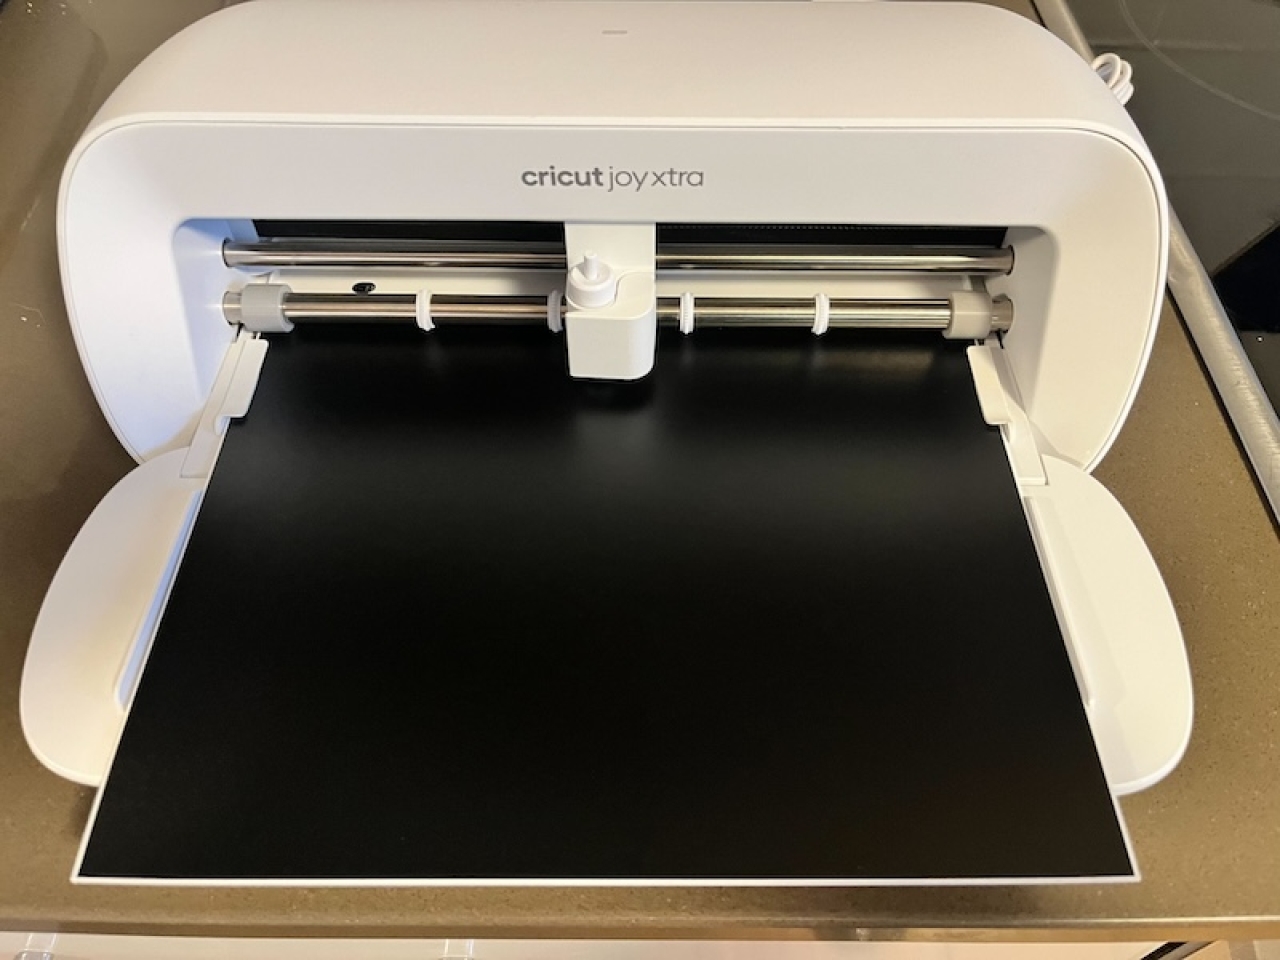 The Ultimate Guide to Cricut Joy Xtra - Hey, Let's Make Stuff